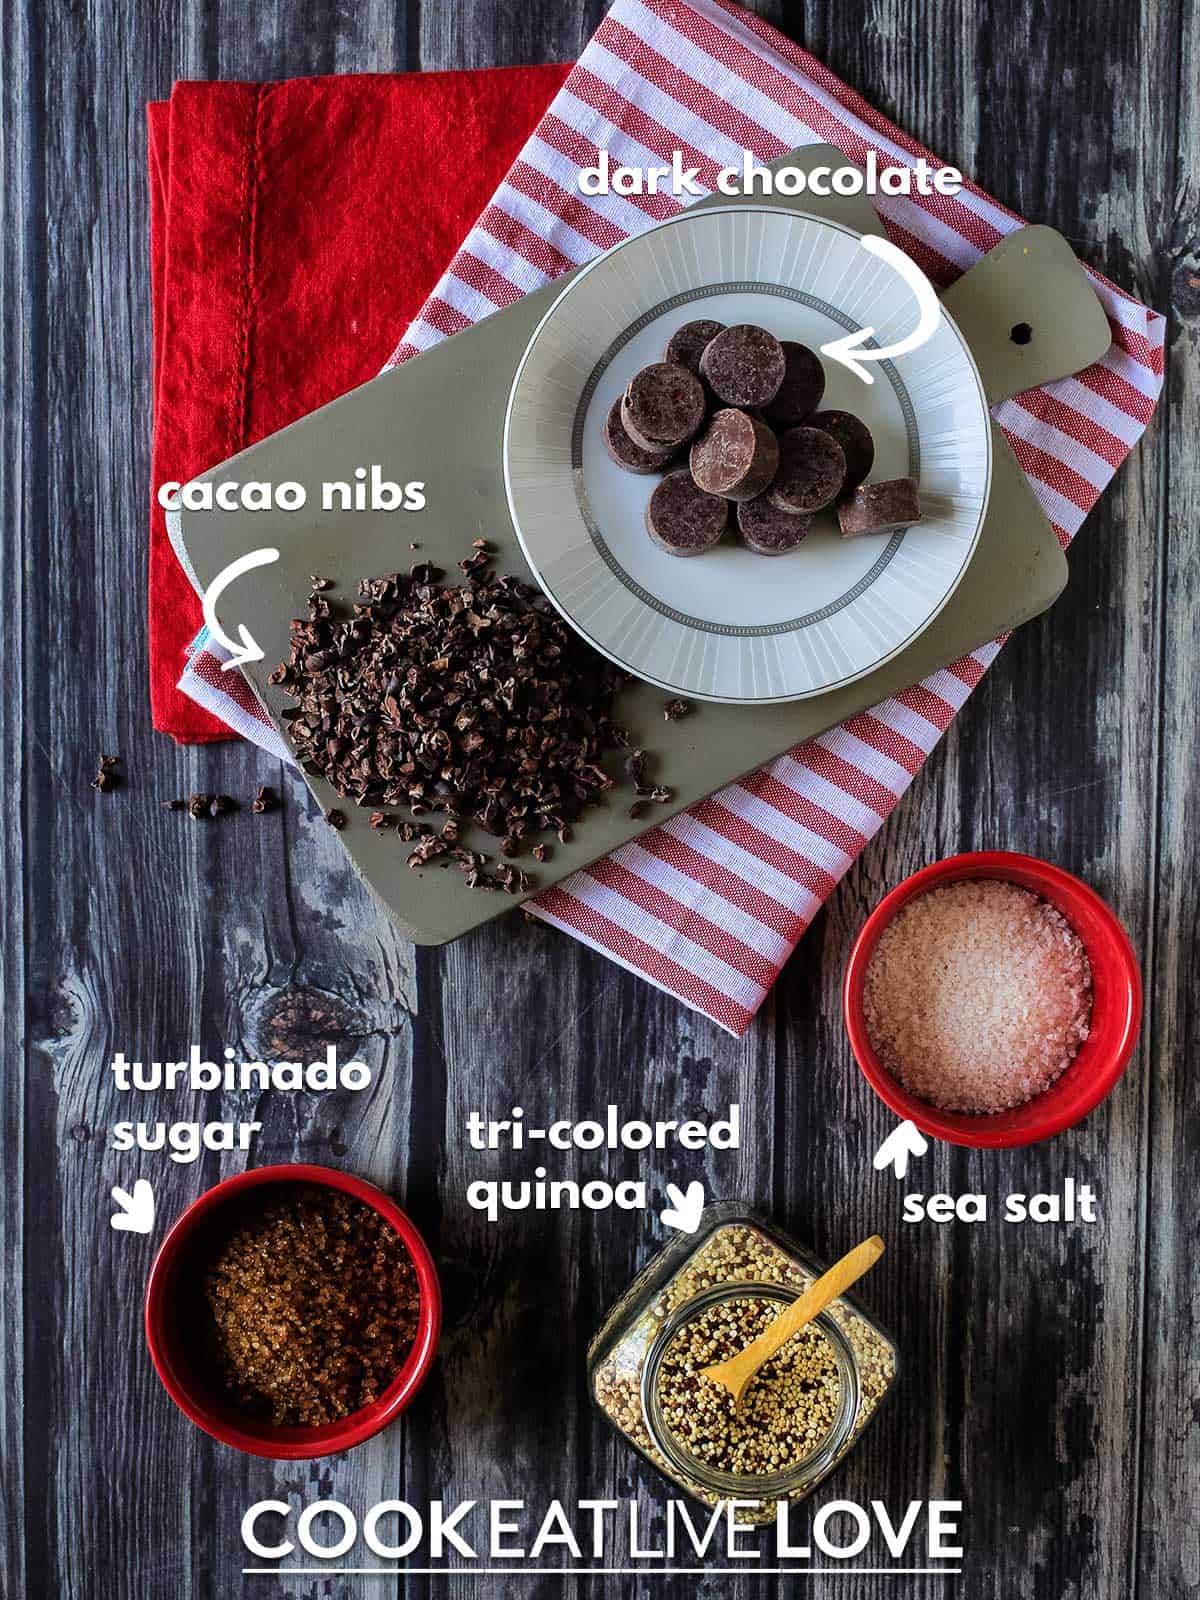 Ingredients to make quinoa chocolate with text